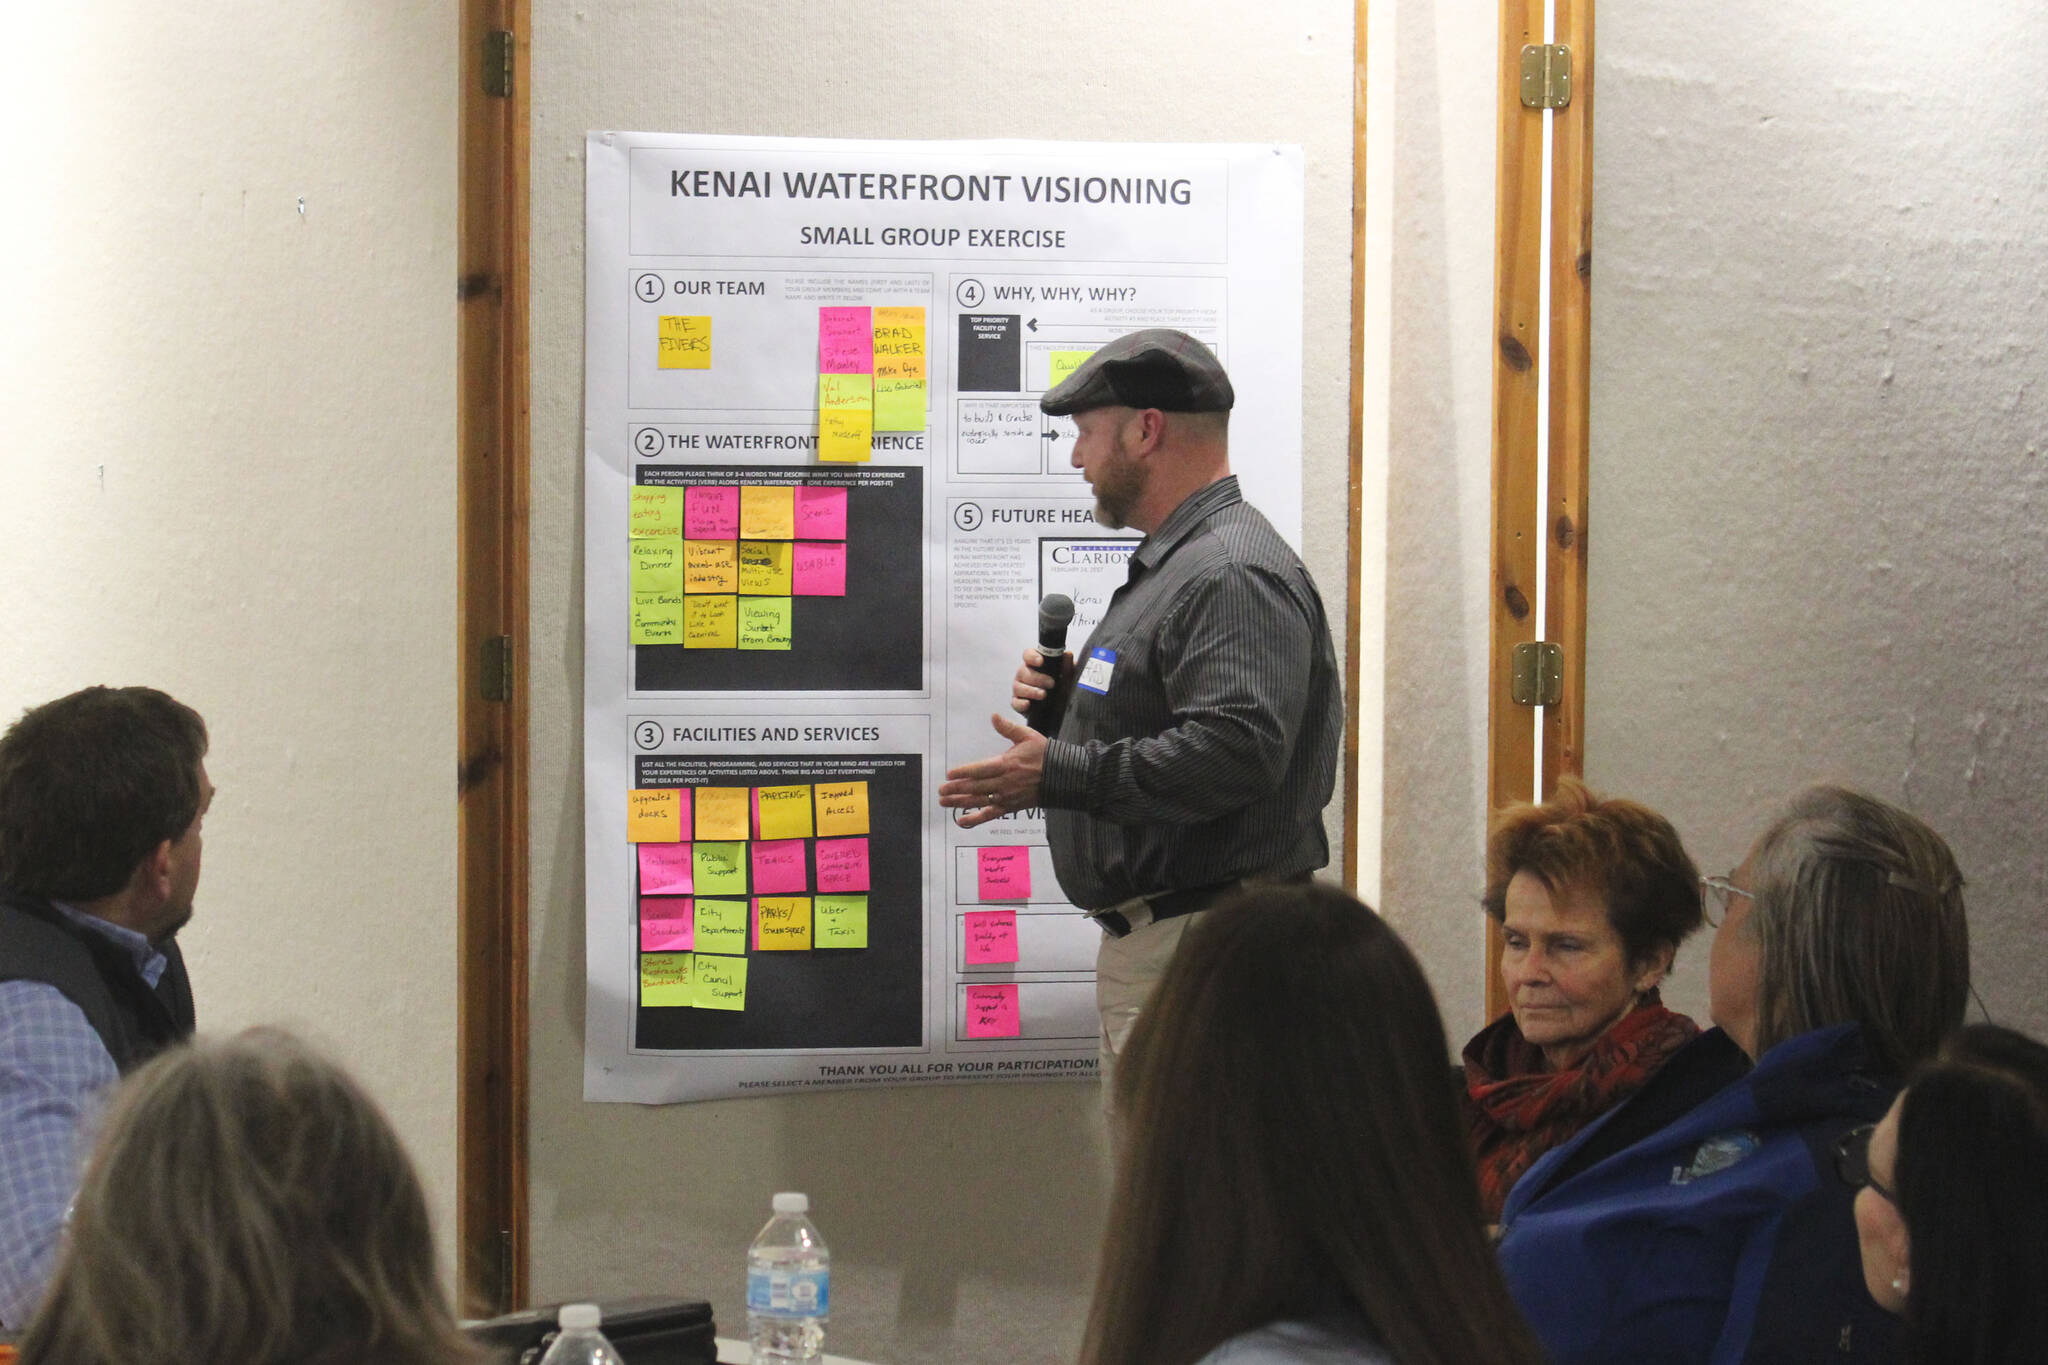 Kenai Parks and Recreation Director Brad Walker speaks during a small group activity as part of a community vision session for the Kenai Waterfront Revitalization Project on Thursday, Feb. 24, 2022 in Kenai, Alaska. (Ashlyn O’Hara/Peninsula Clarion)